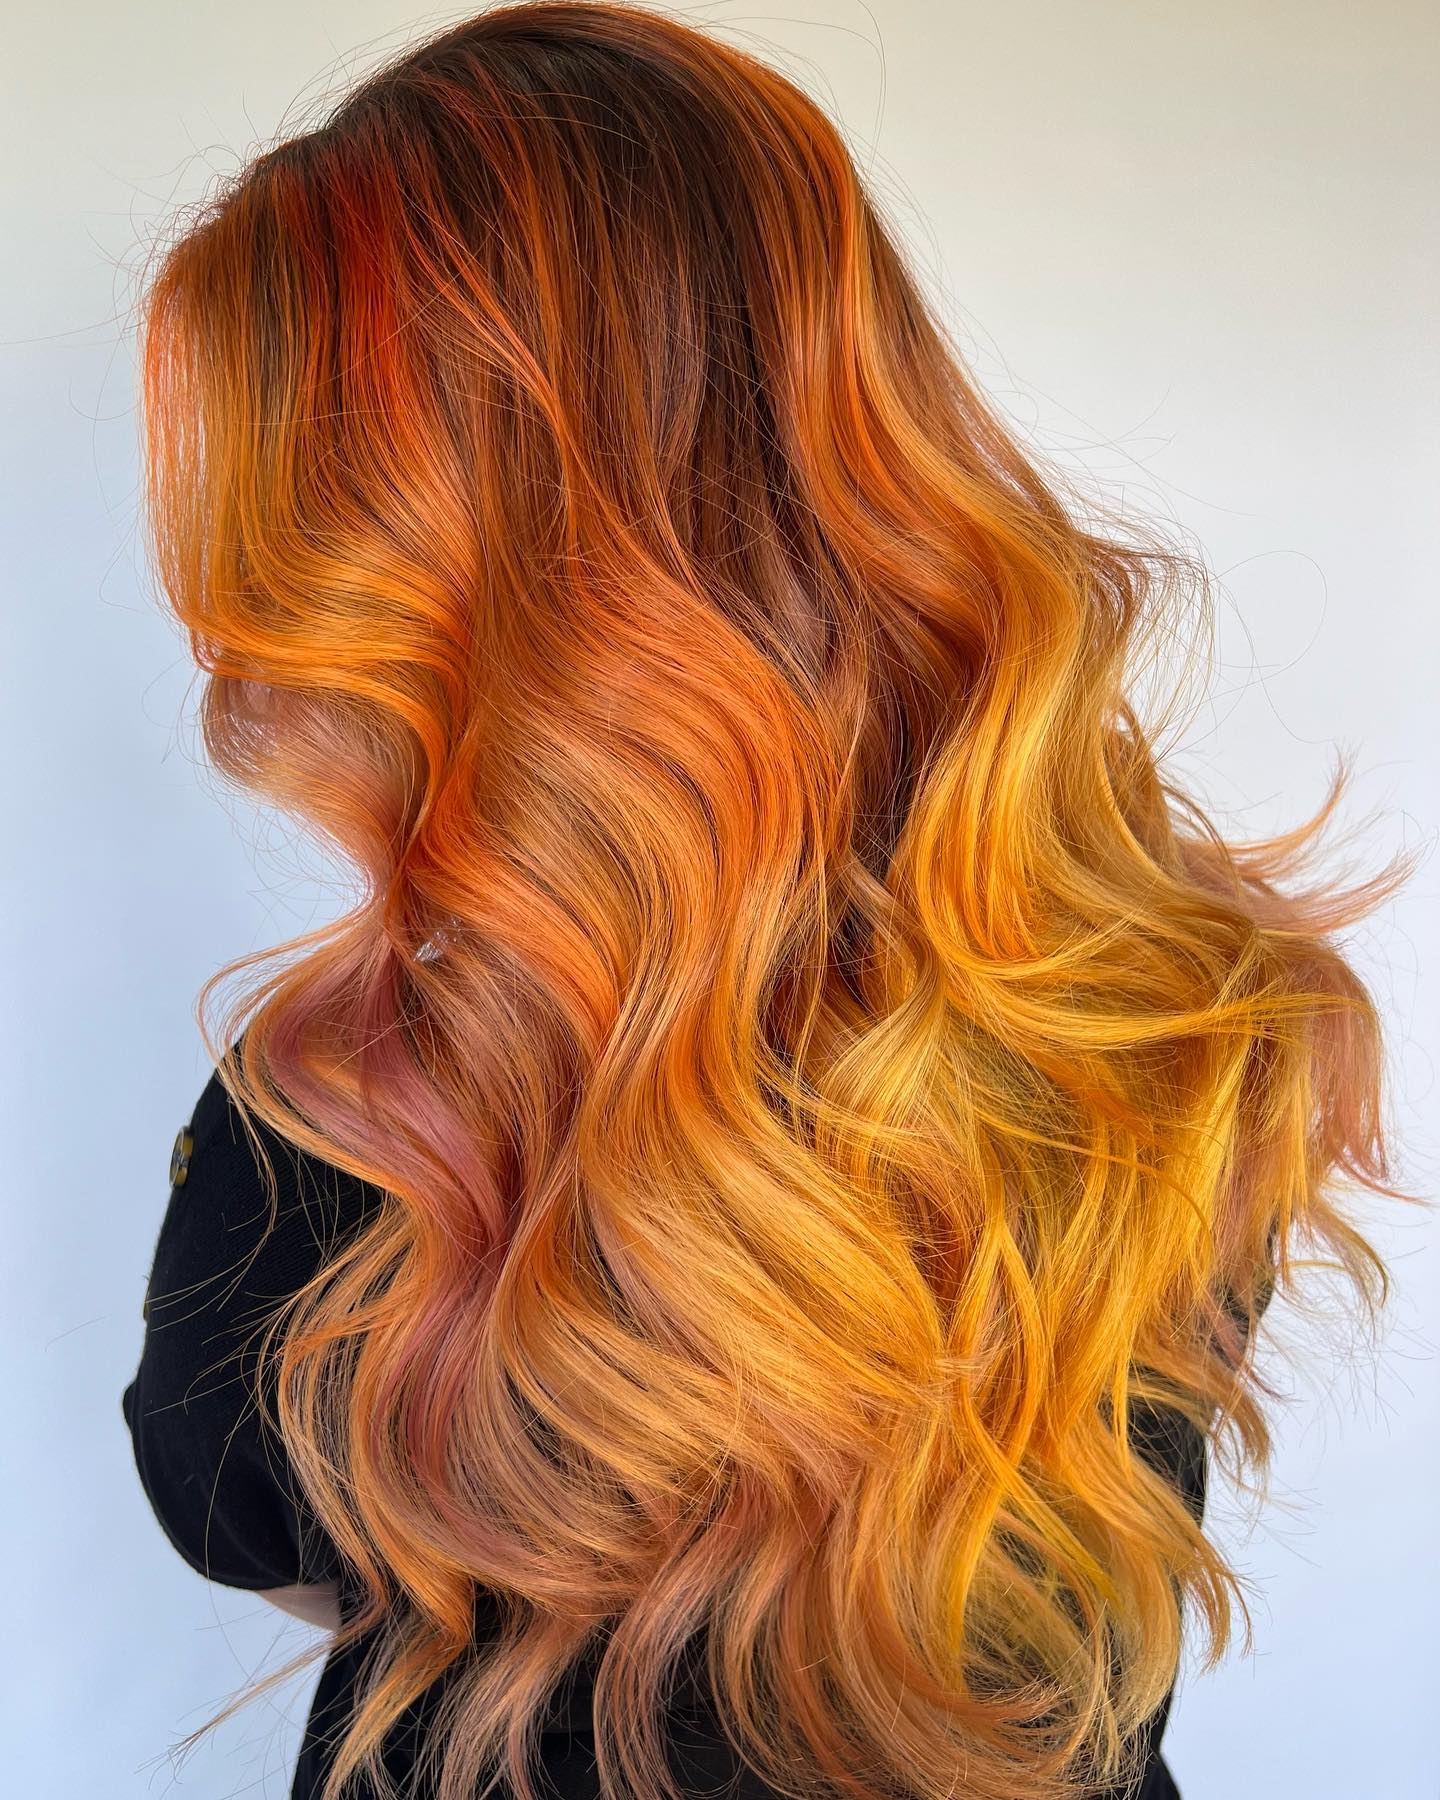 Long Bright Copper Hair with Golden Hues